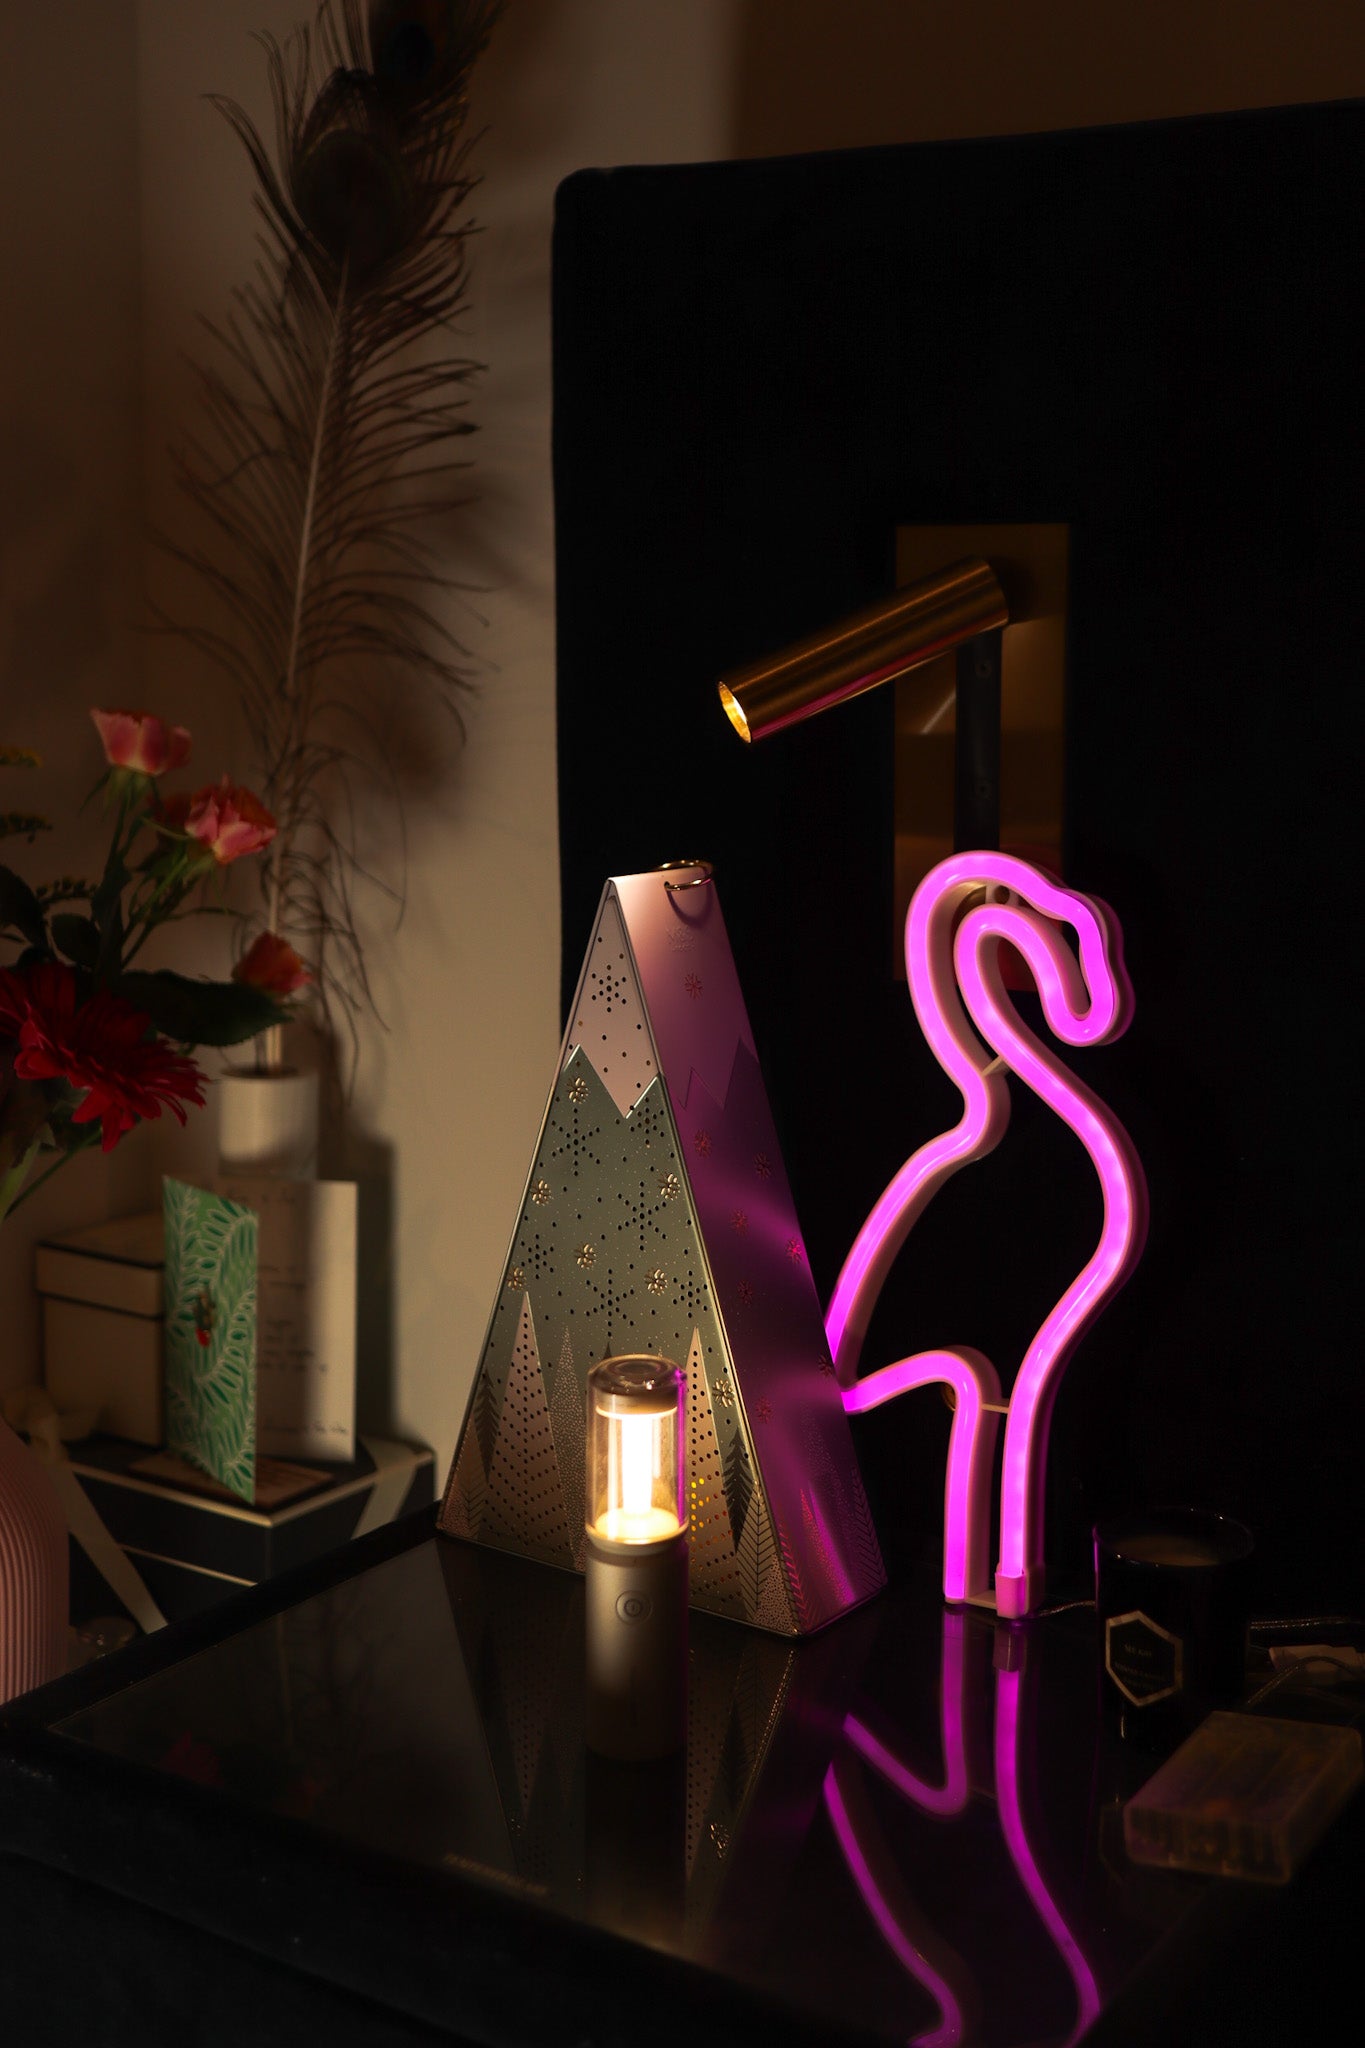 FLAMINGO Neon LED Light, FLAMINGO Neon LED Lamp For Living Room & Bedroom, Table & Wall Christmas Decoration for Kids & Adults - Battery Powered - PINK Colour